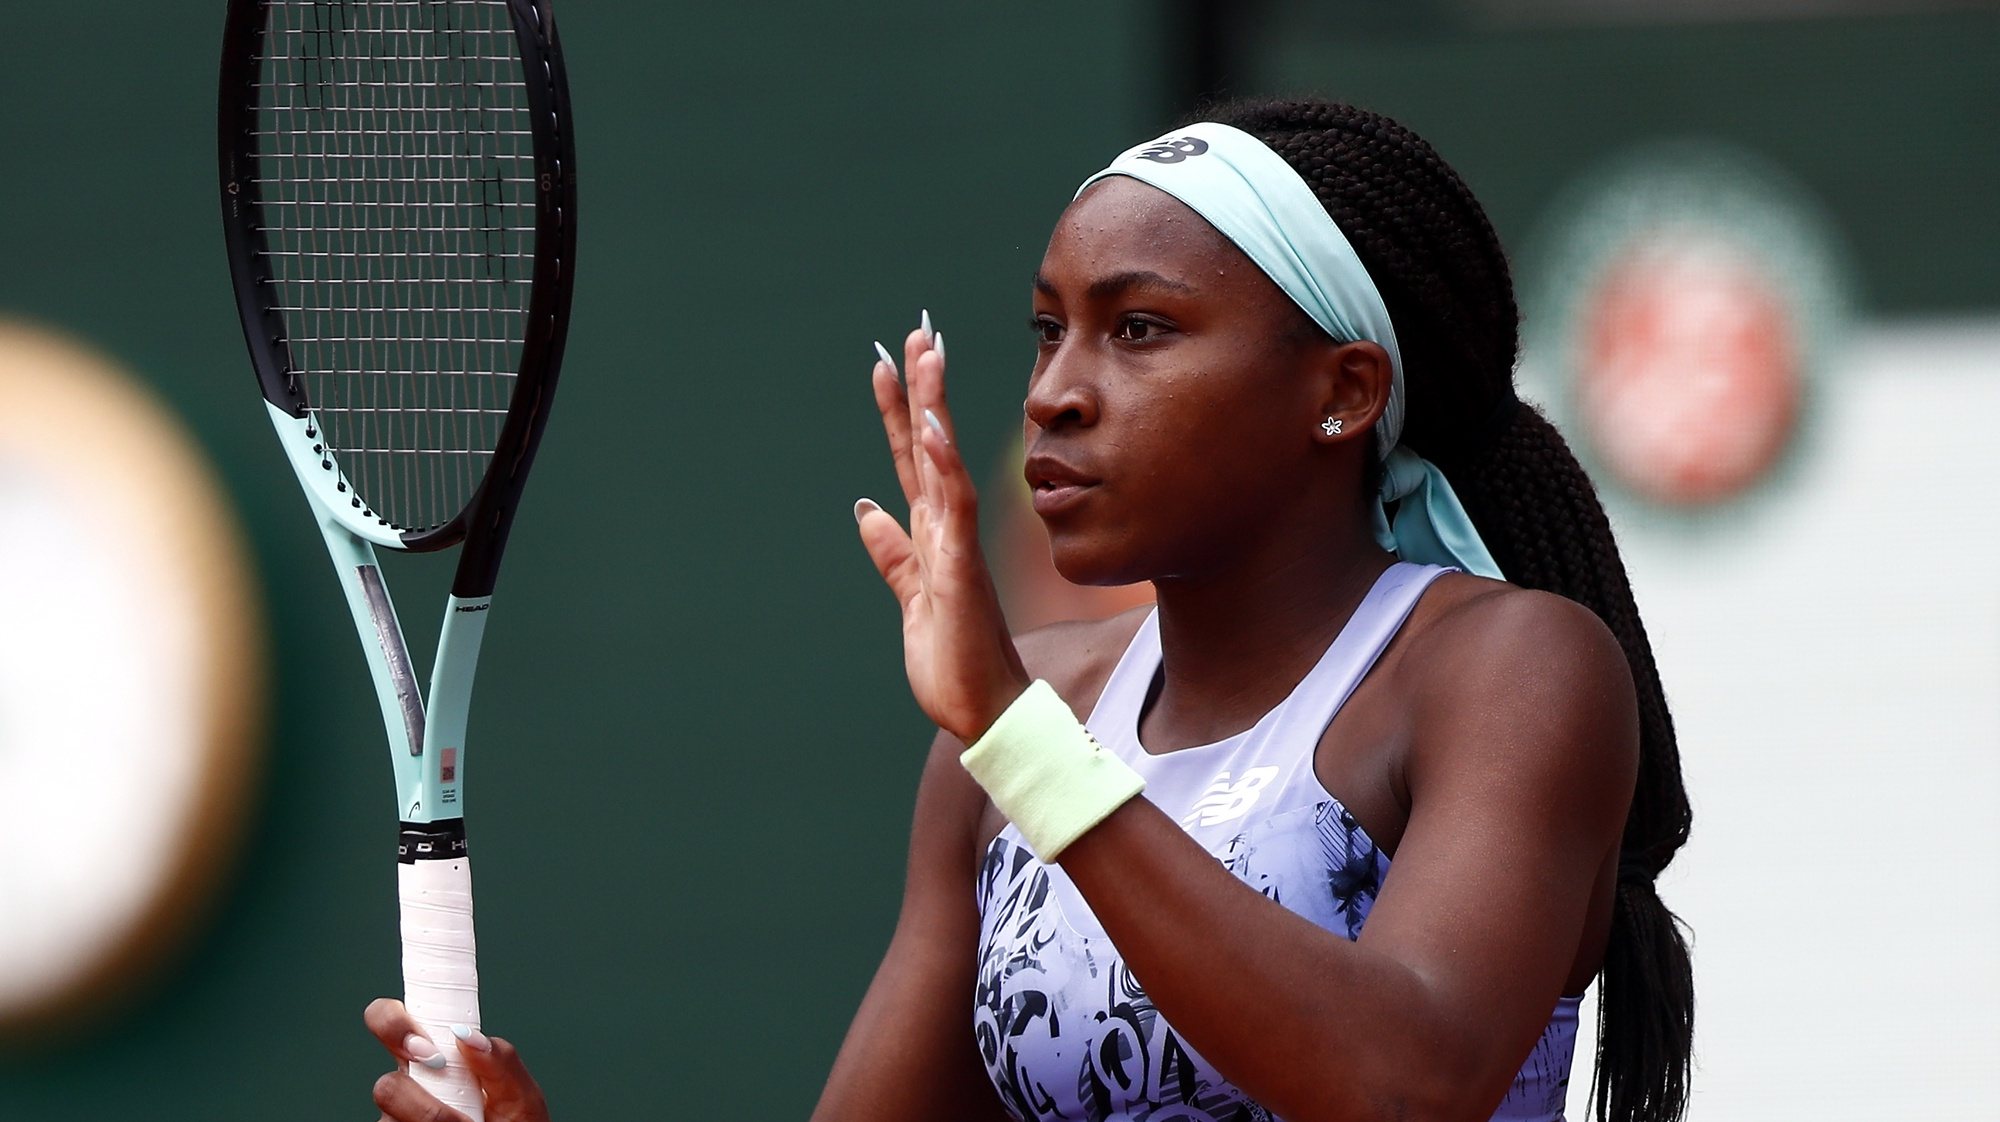 epa09987756 Coco Gauff of the USA reacts as she plays Sloane Stephens of the USA in their women’s quarterfinal match during the French Open tennis tournament at Roland ​Garros in Paris, France, 31 May 2022.  EPA/MOHAMMED BADRA